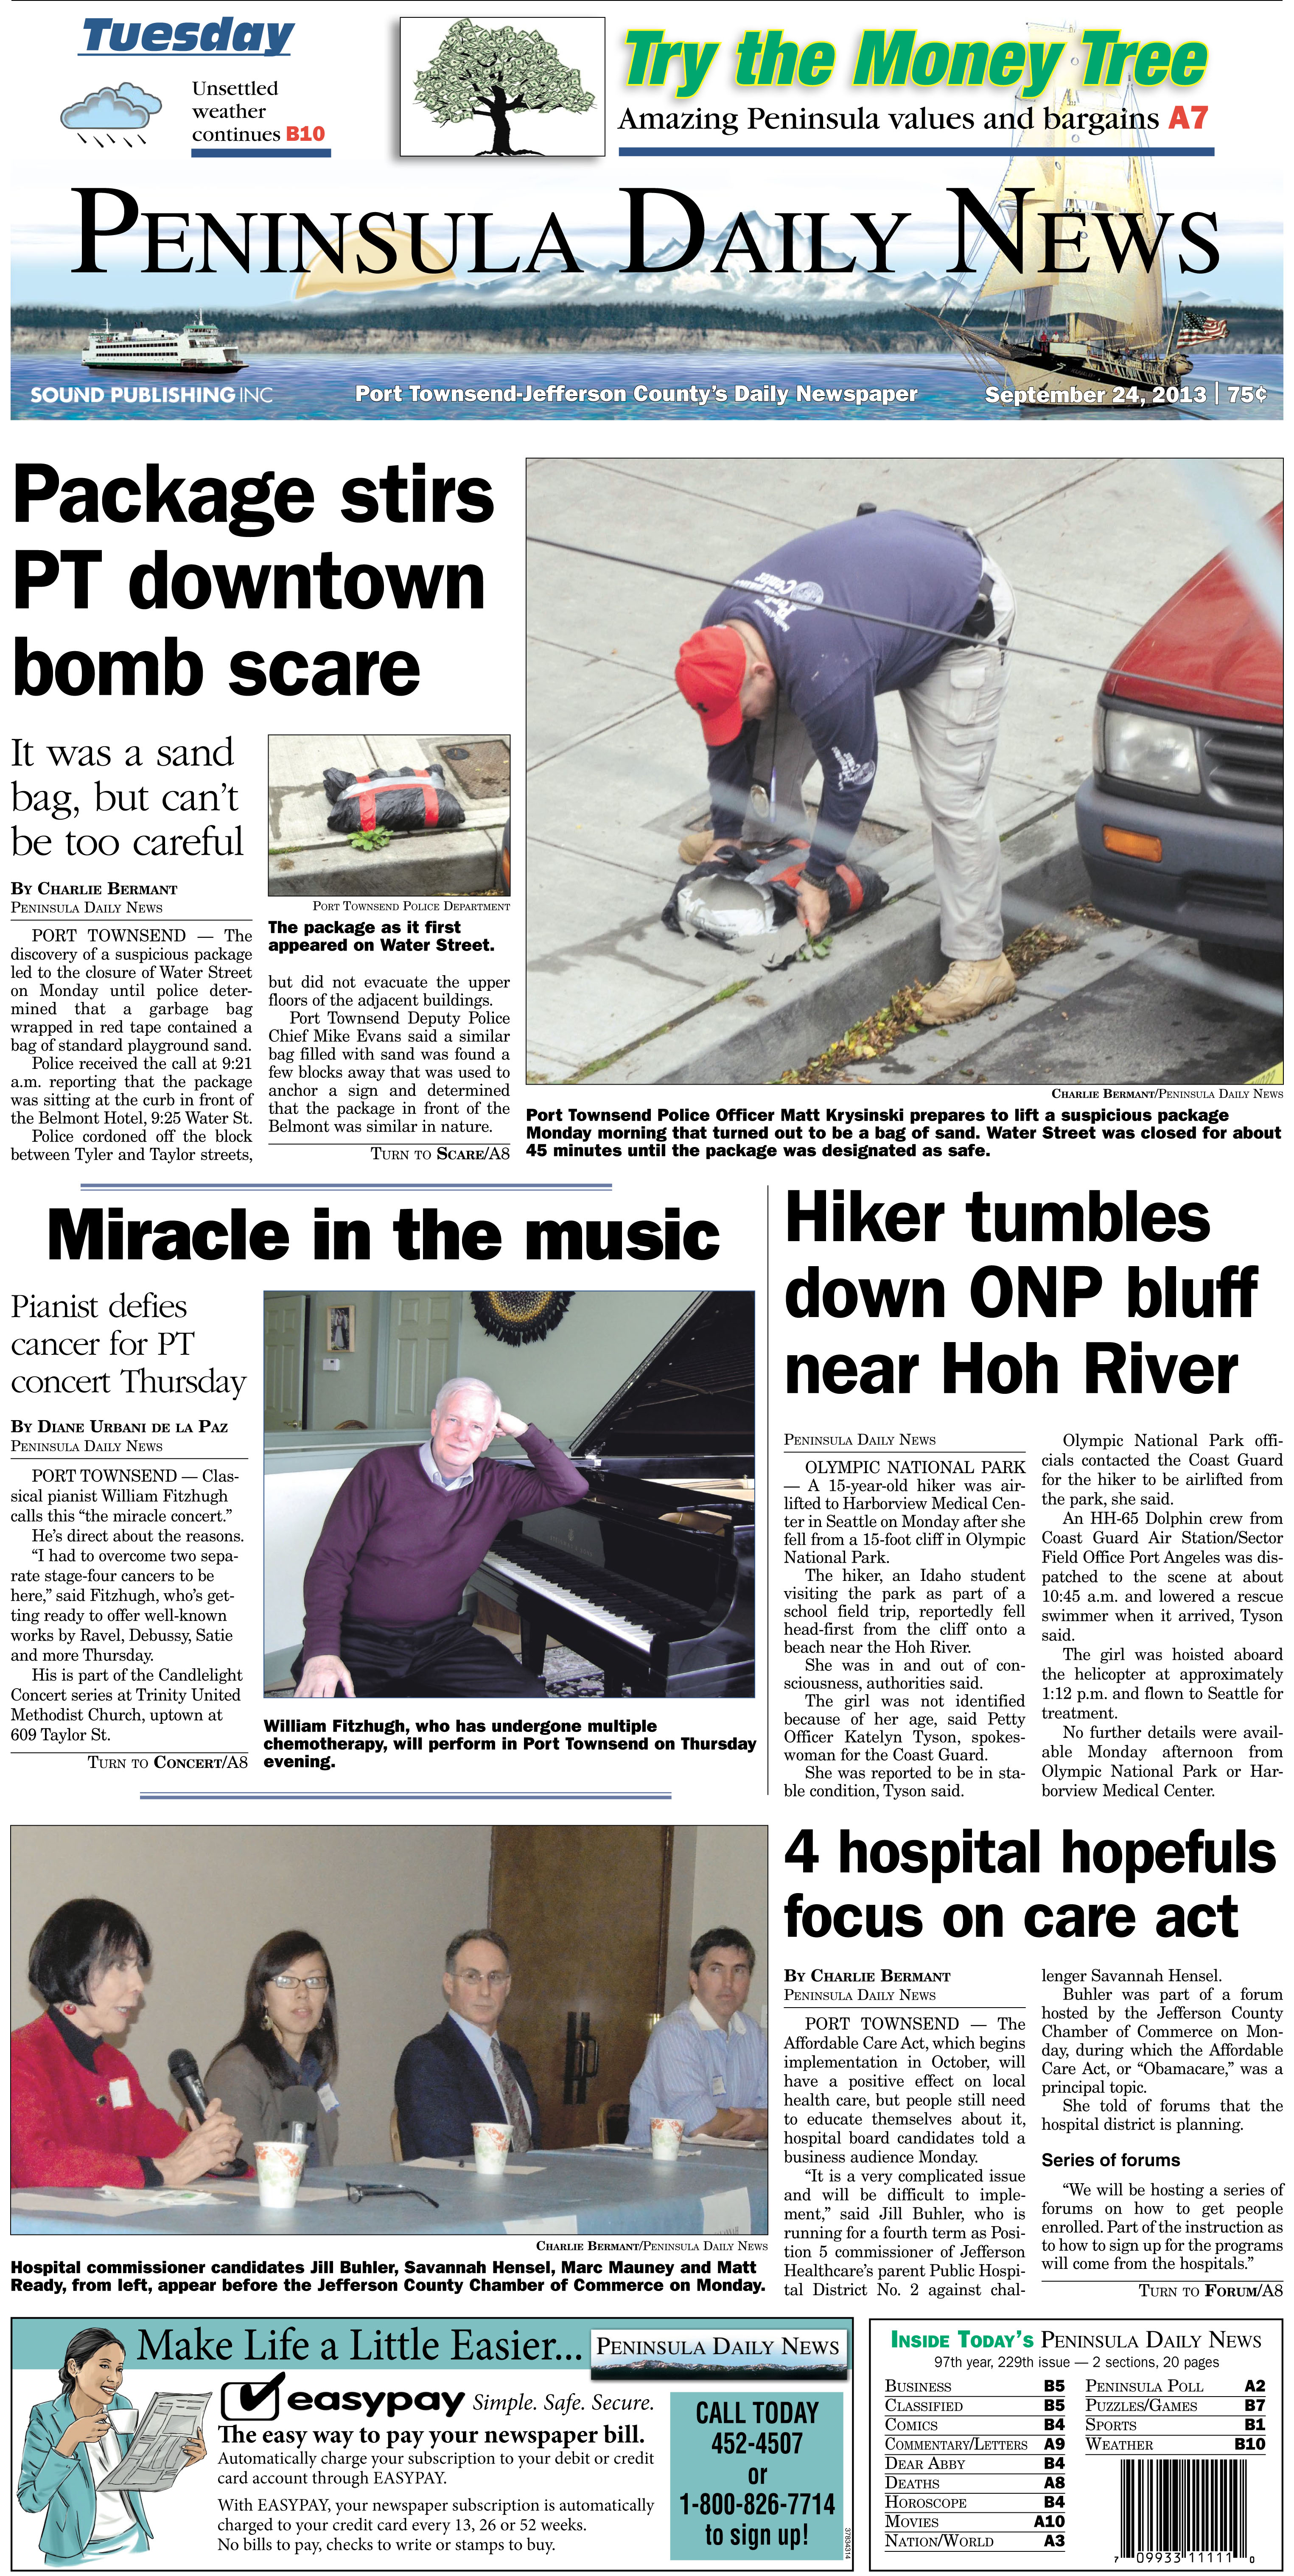 Tuesday's PDN for our Jefferson County readers. (Click on image to enlarge)